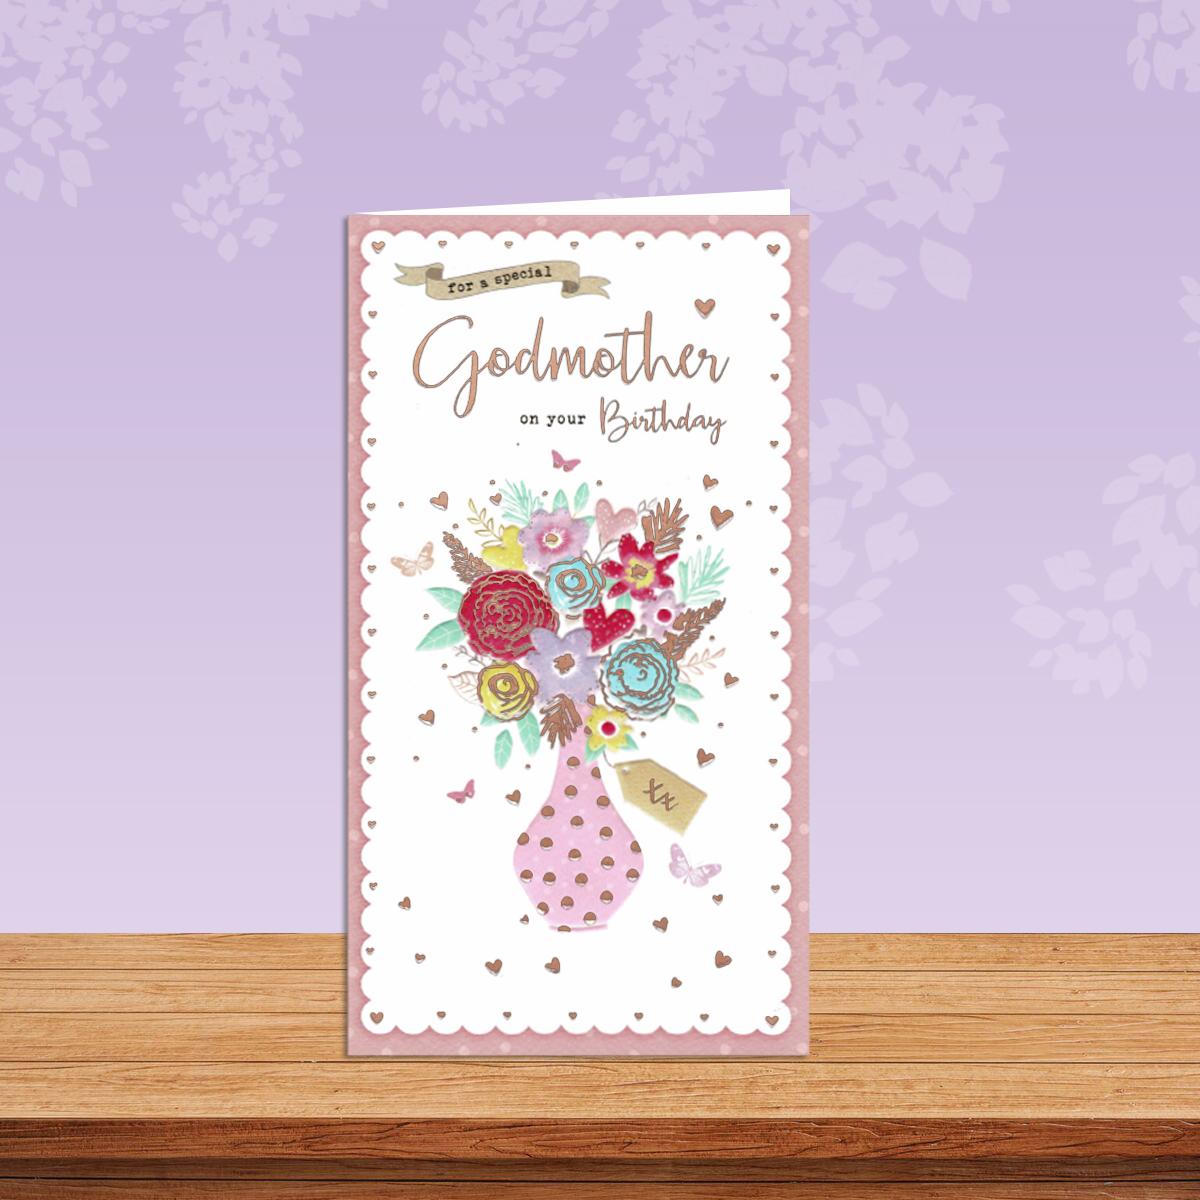 Godmother Balloons Card Sitting On A Display Shelf